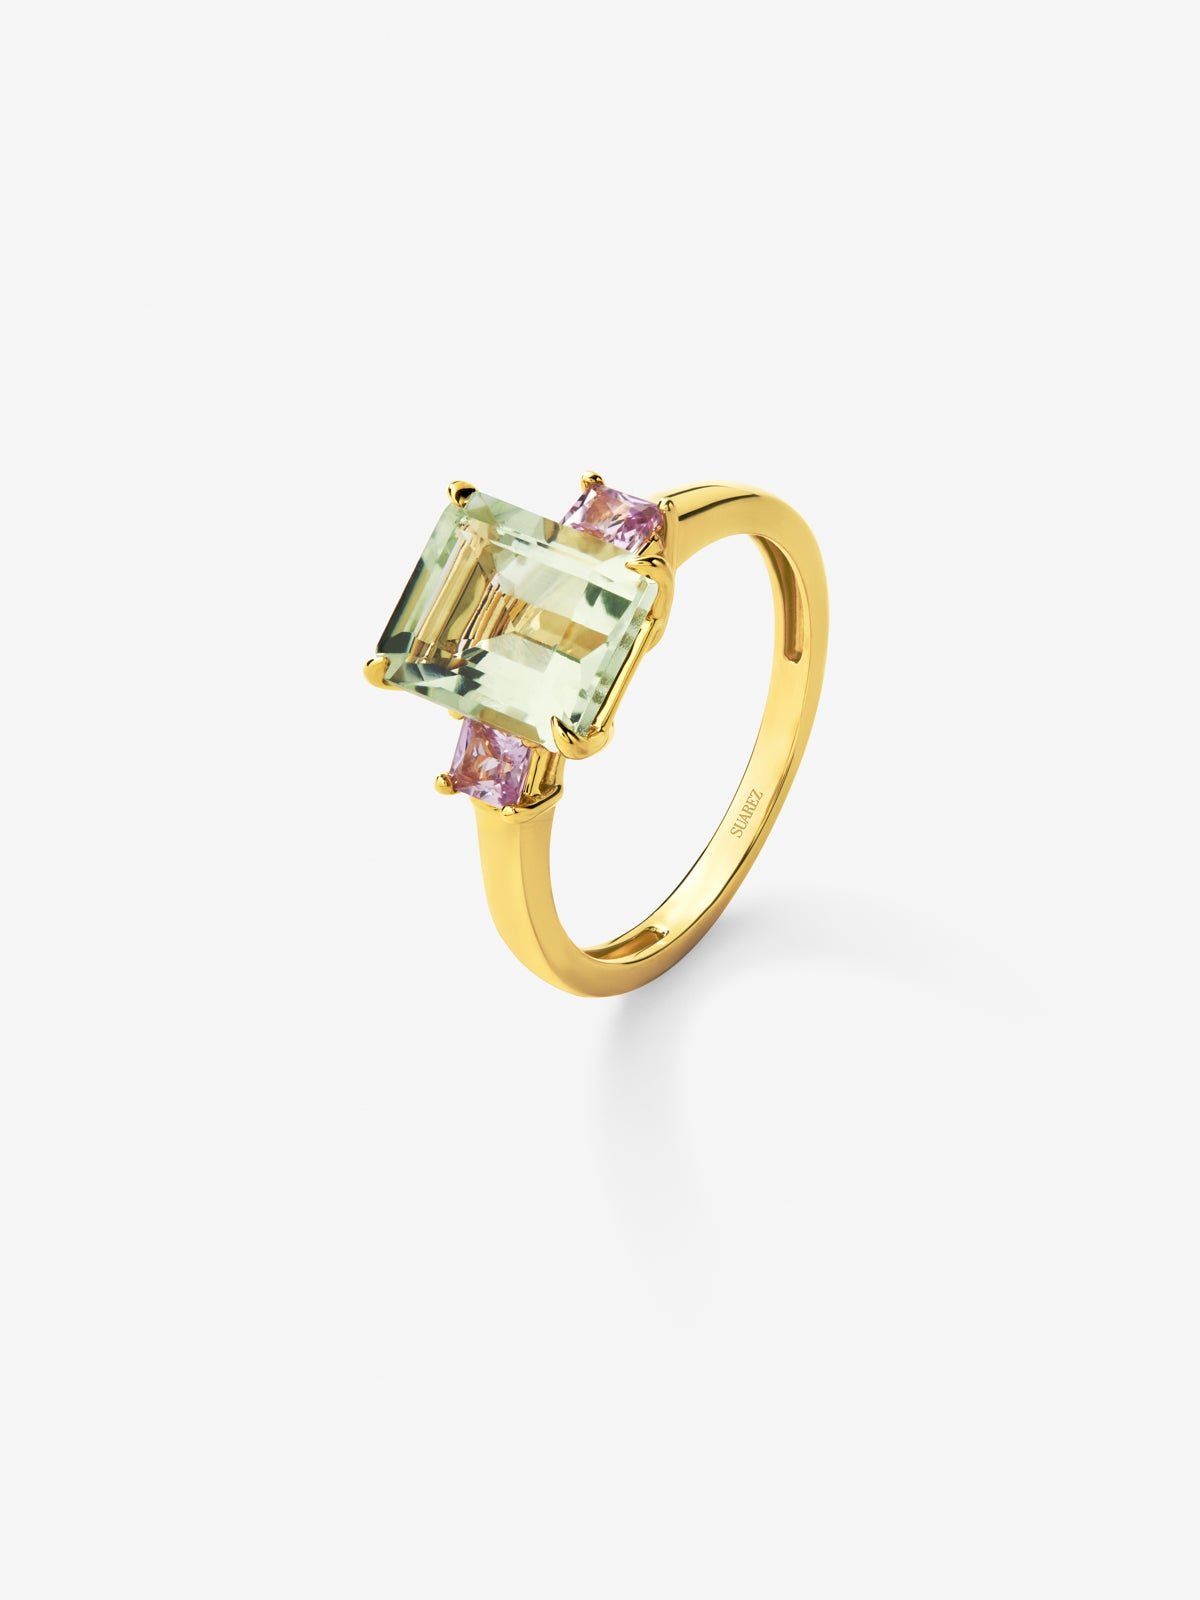 18K yellow gold triple ring with emerald-cut green amethyst of 2.53 cts and 2 princess-cut pink sapphires with a total of 0.41 cts